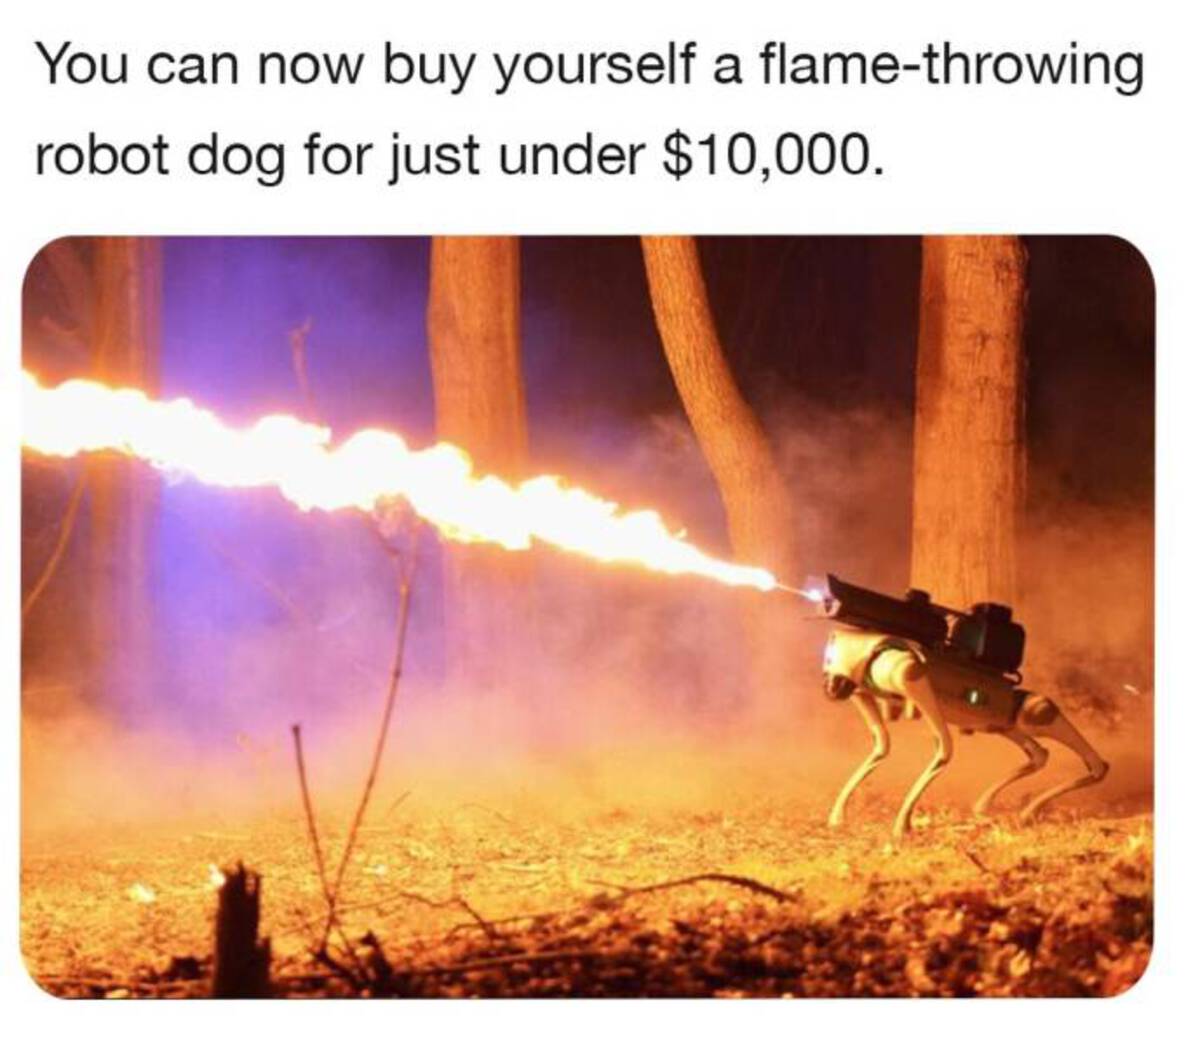 Robot - You can now buy yourself a flamethrowing robot dog for just under $10,000.